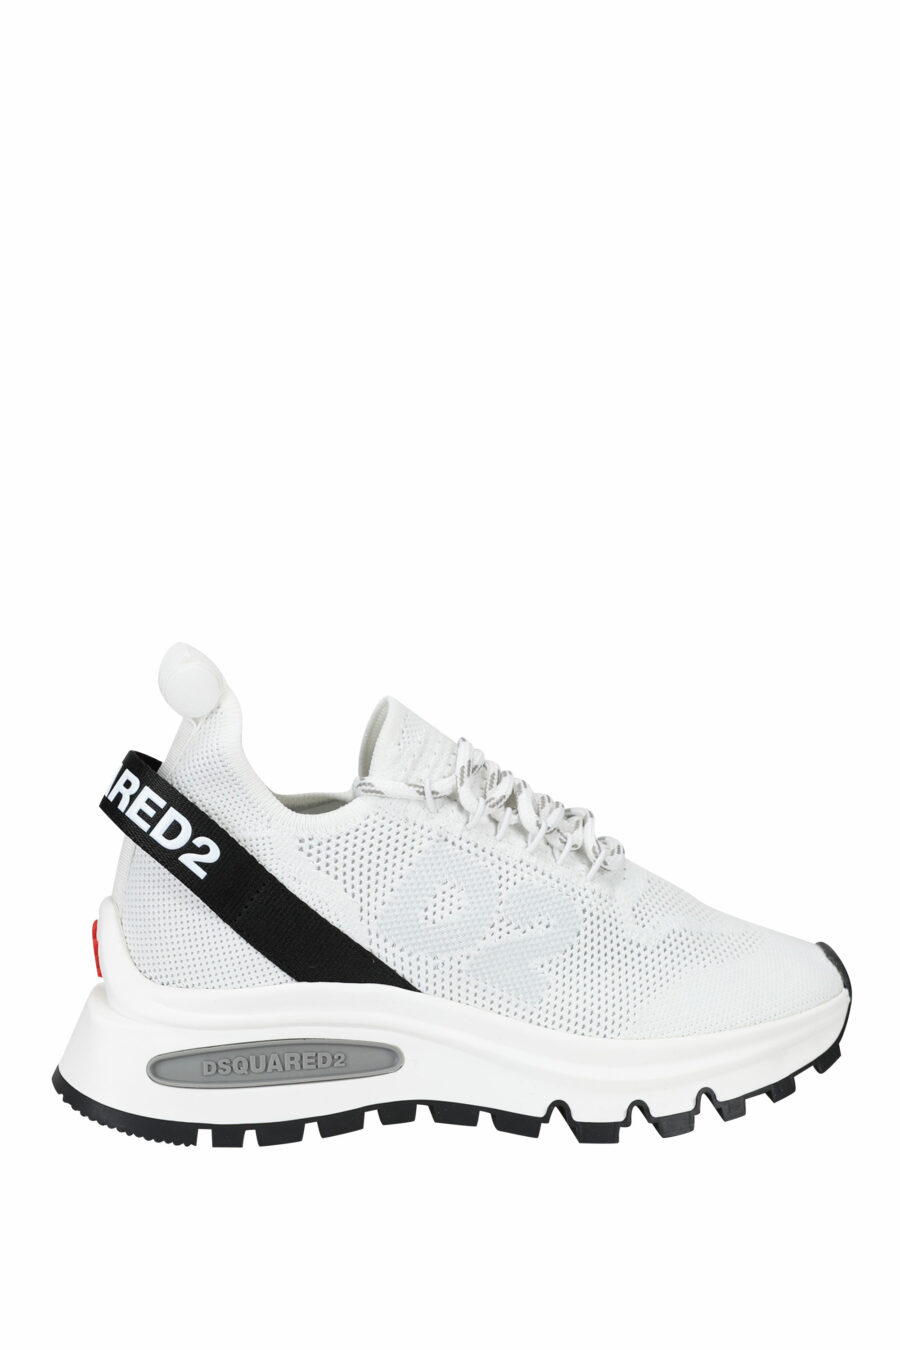 White trainers with black logo and inner tube sole - 8055777249857